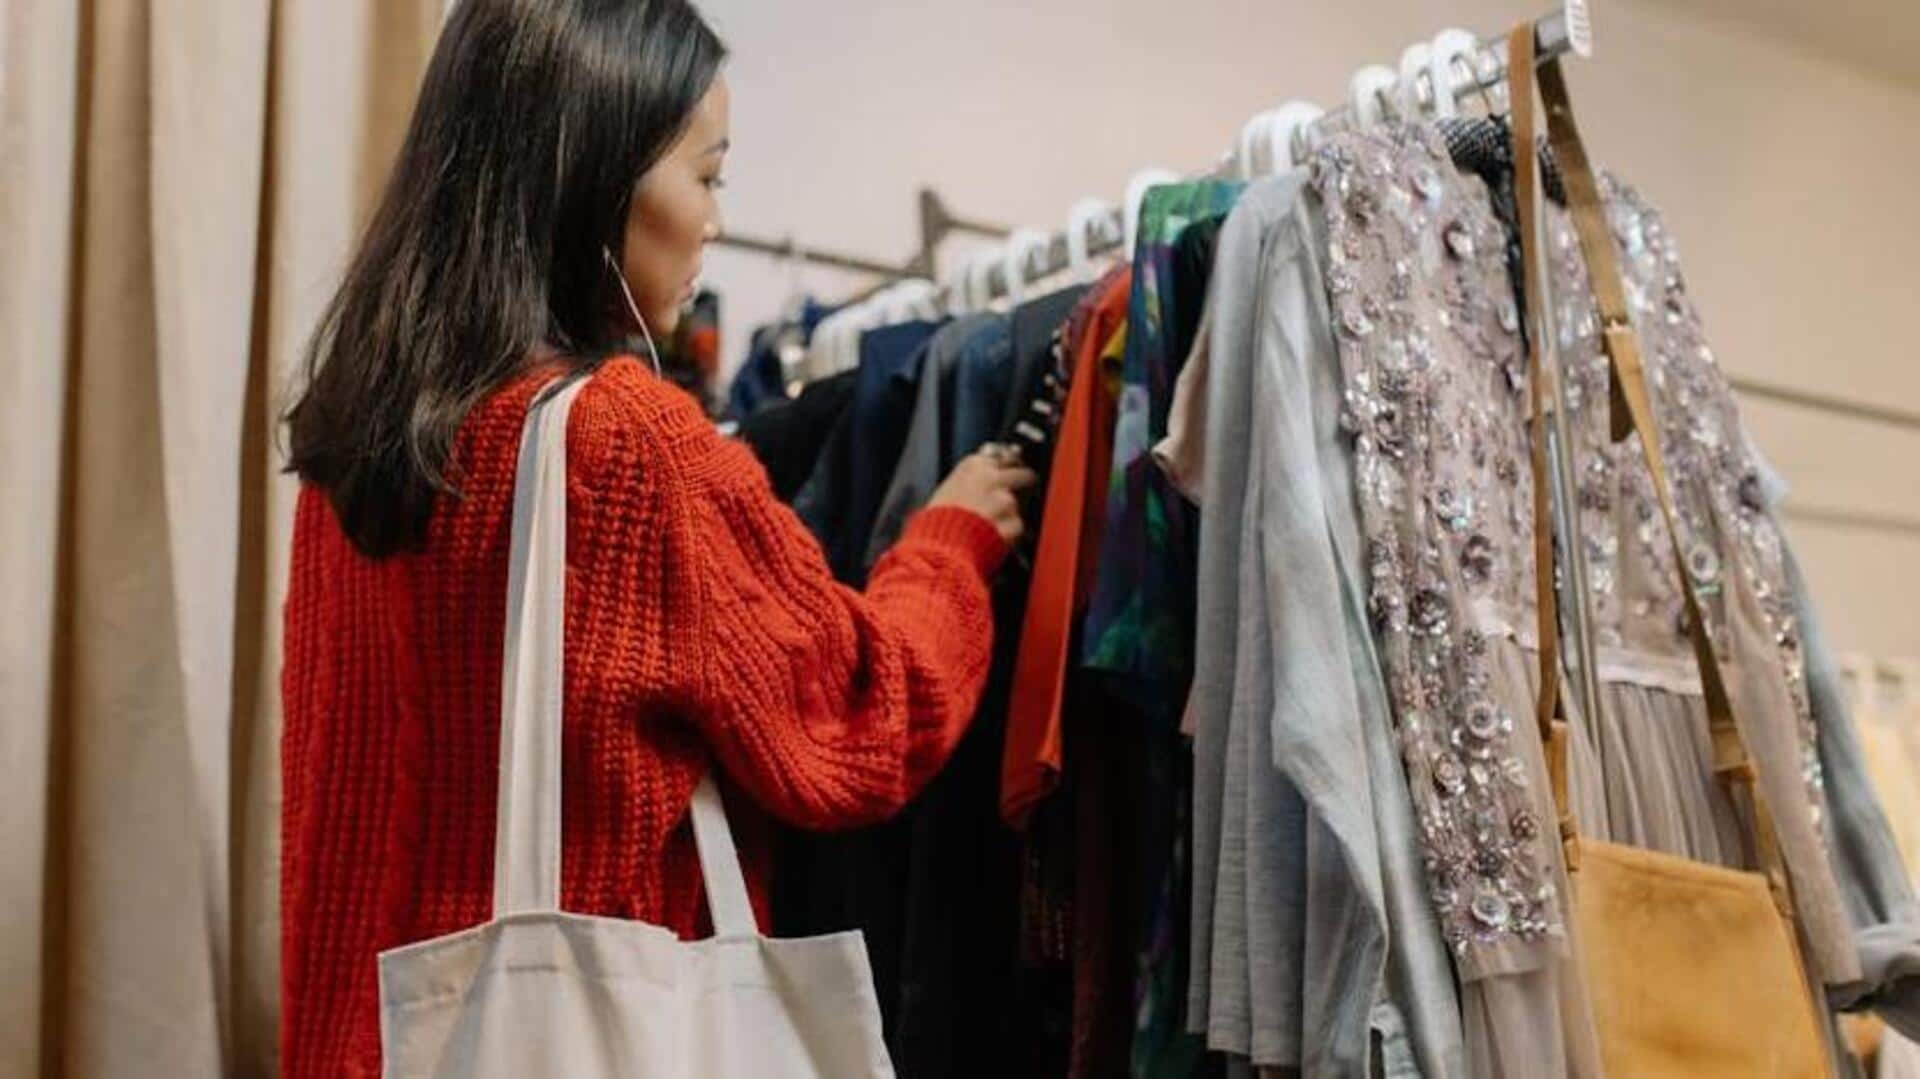 Thrift store chic: How to shop budget-friendly